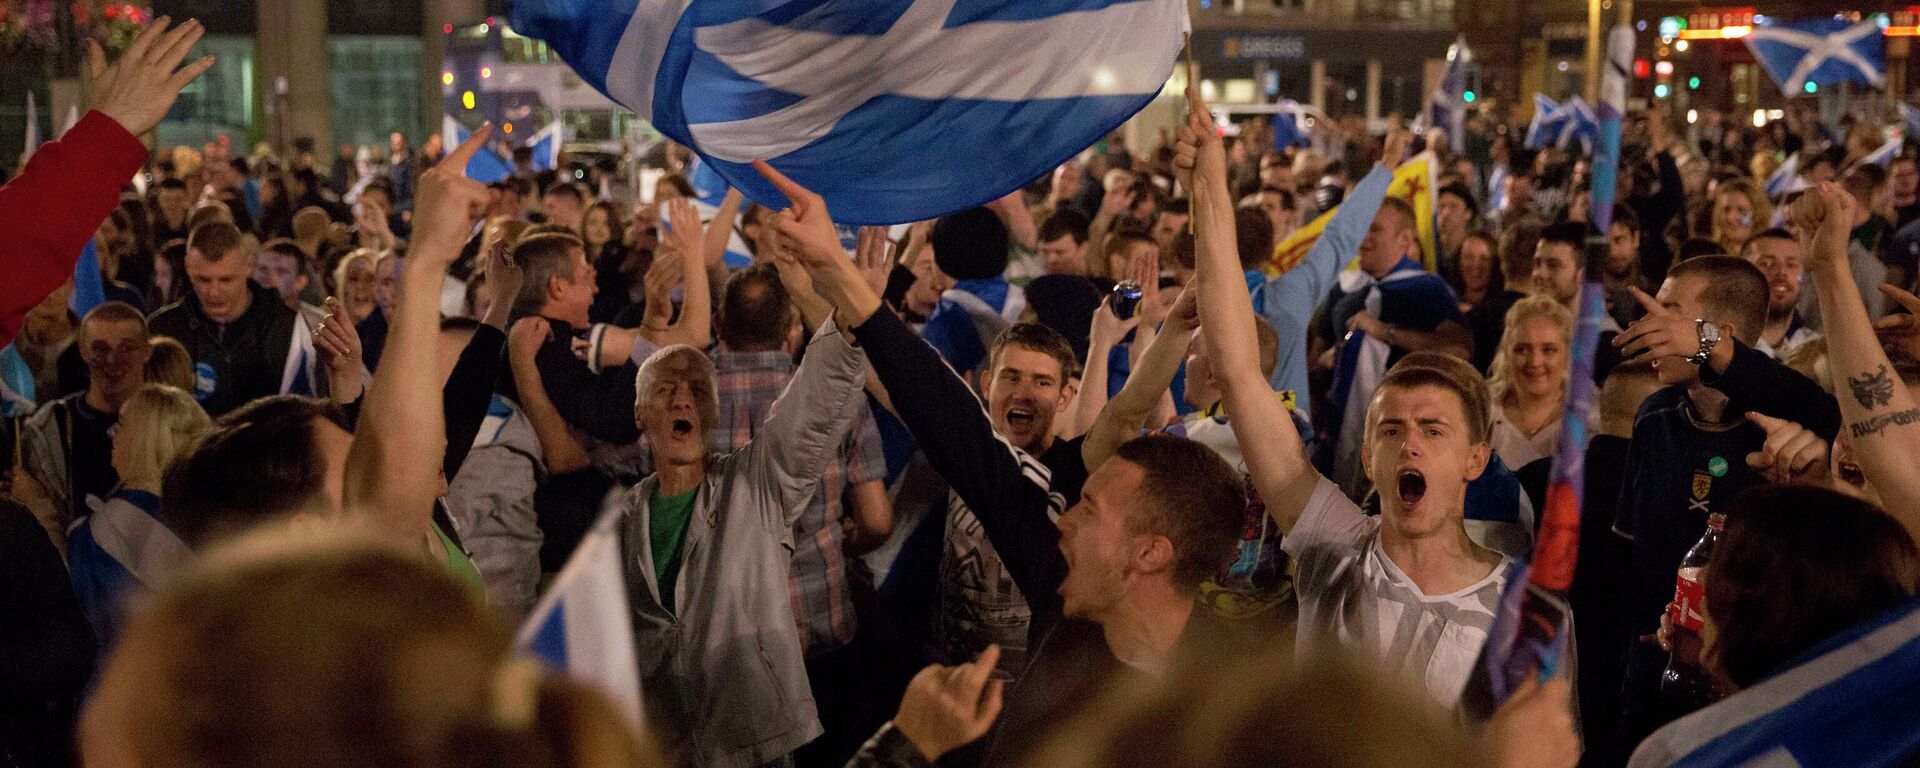 Supporters of the Yes campaign in the Scottish independence referendum wave Scottish Saltire flags as they await the result after the polls closed, in Glasgow, Scotland. - Sputnik International, 1920, 07.07.2022